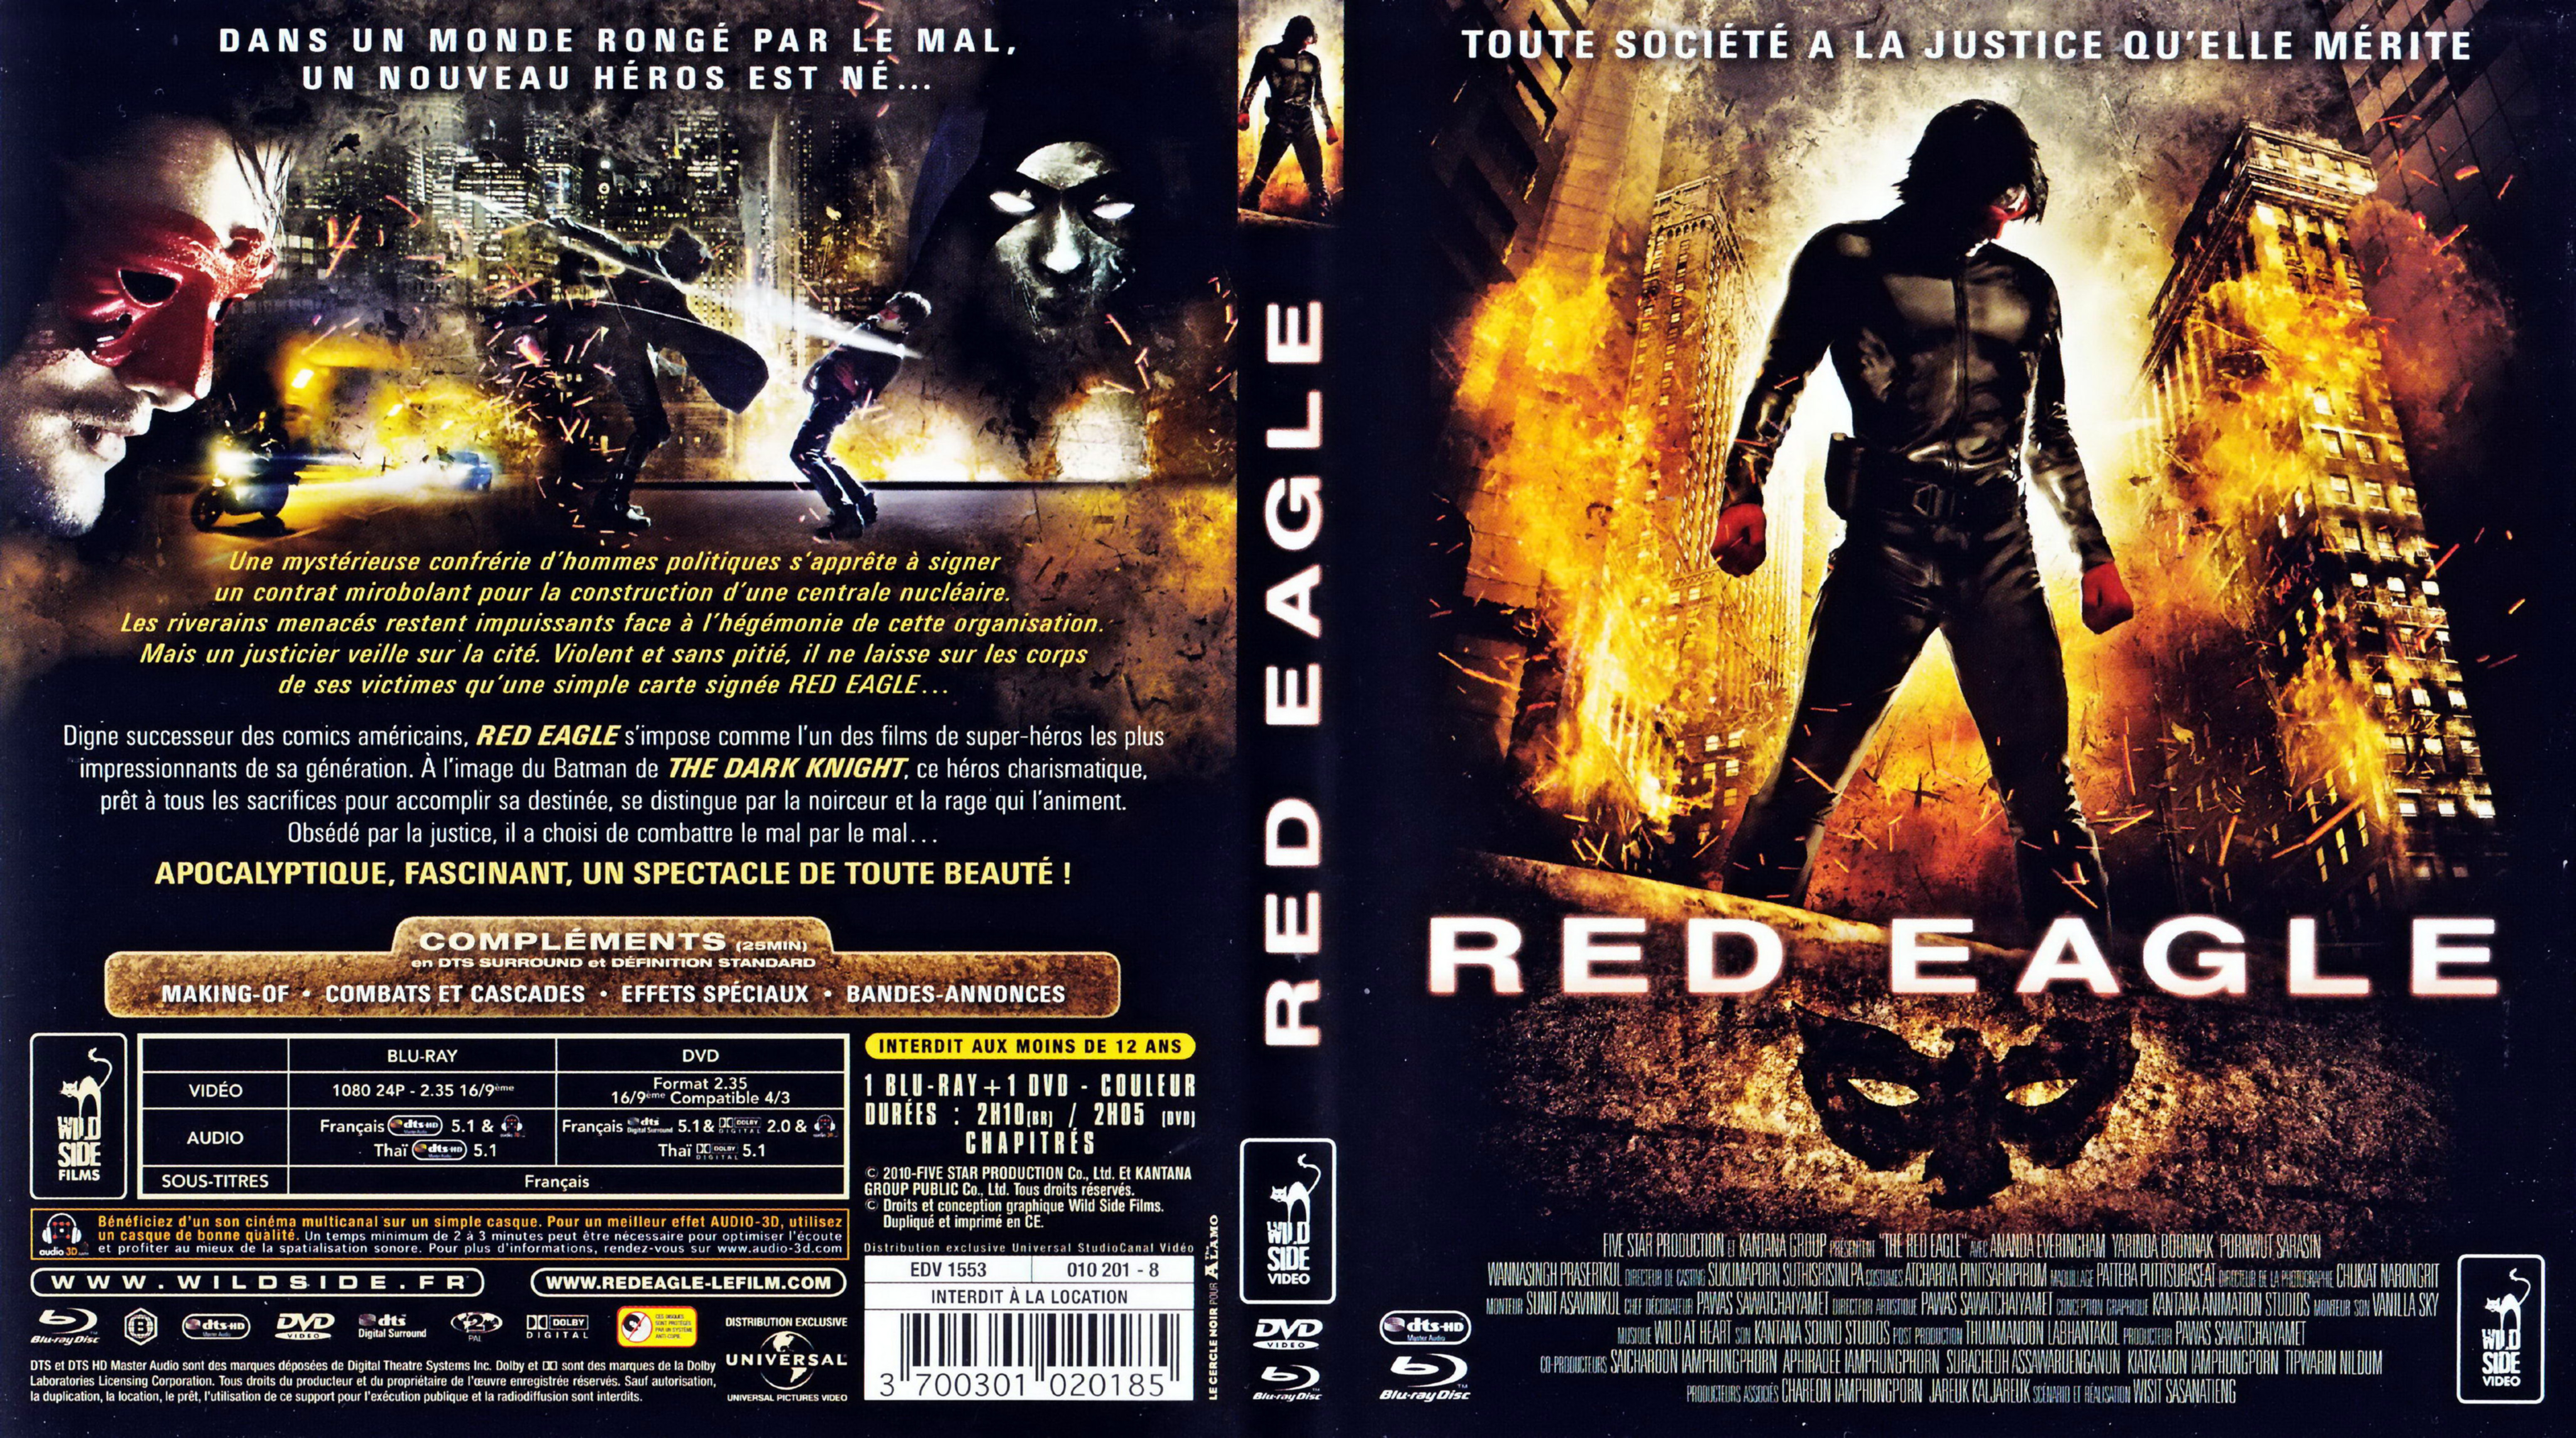 Jaquette DVD Red eagle (BLU-RAY)